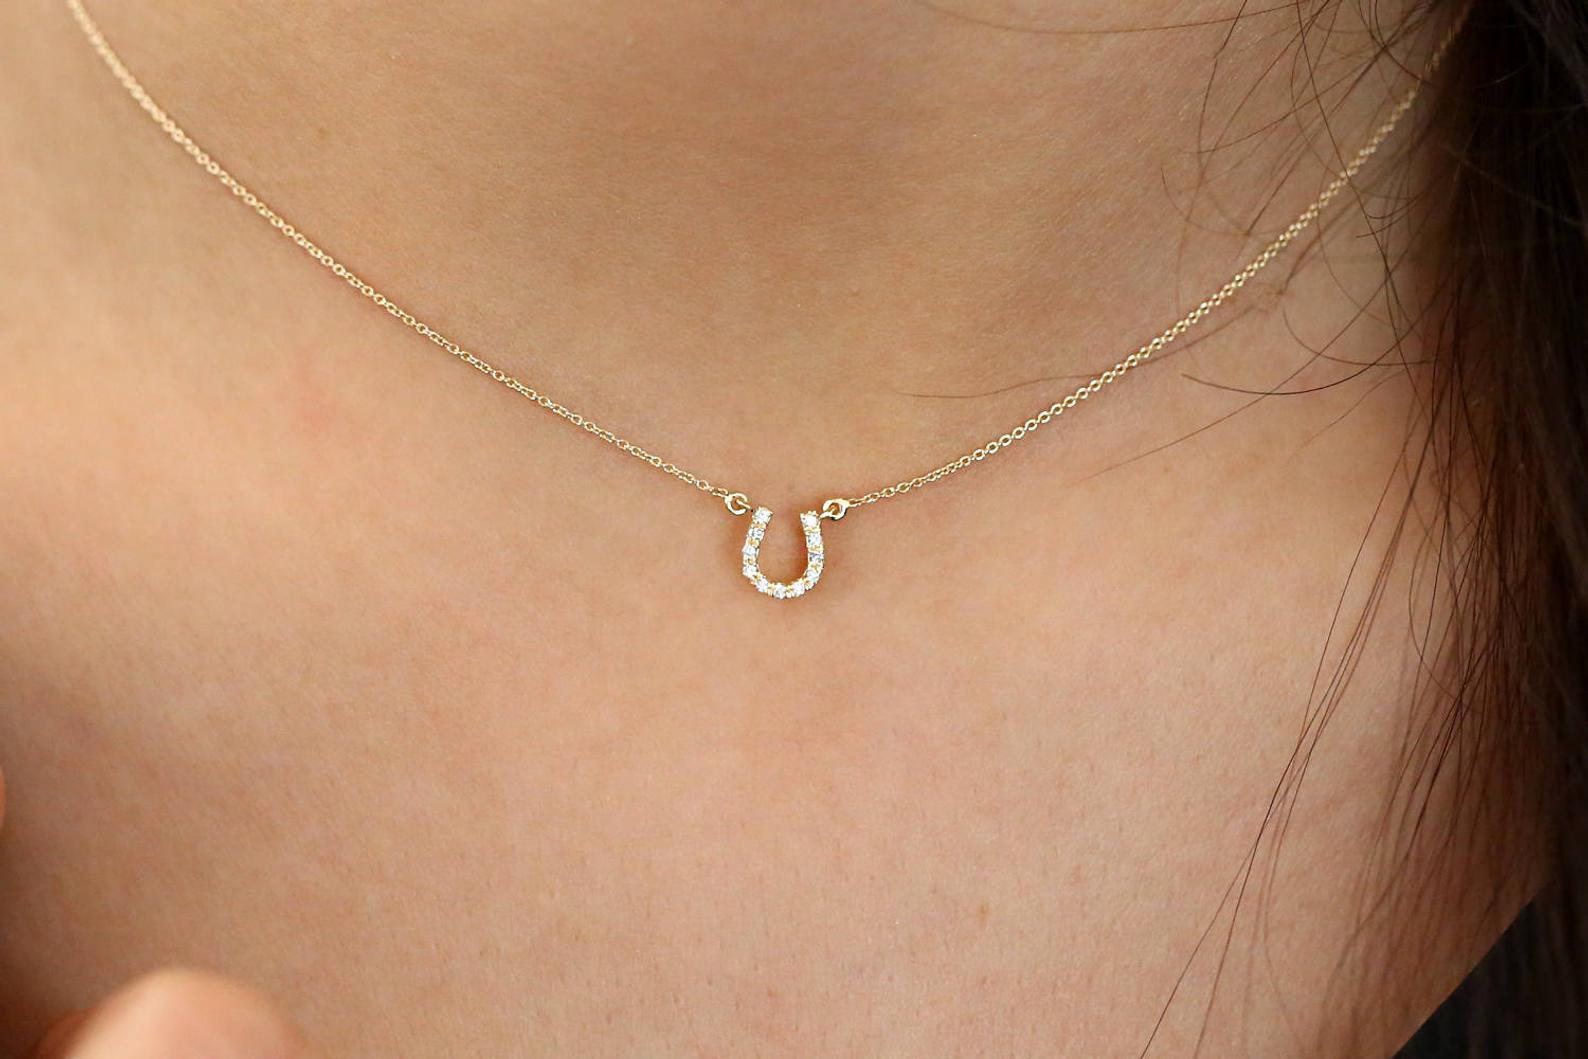 Horseshoe Necklace in Silver Tone – Shop Lune Global Private Limited